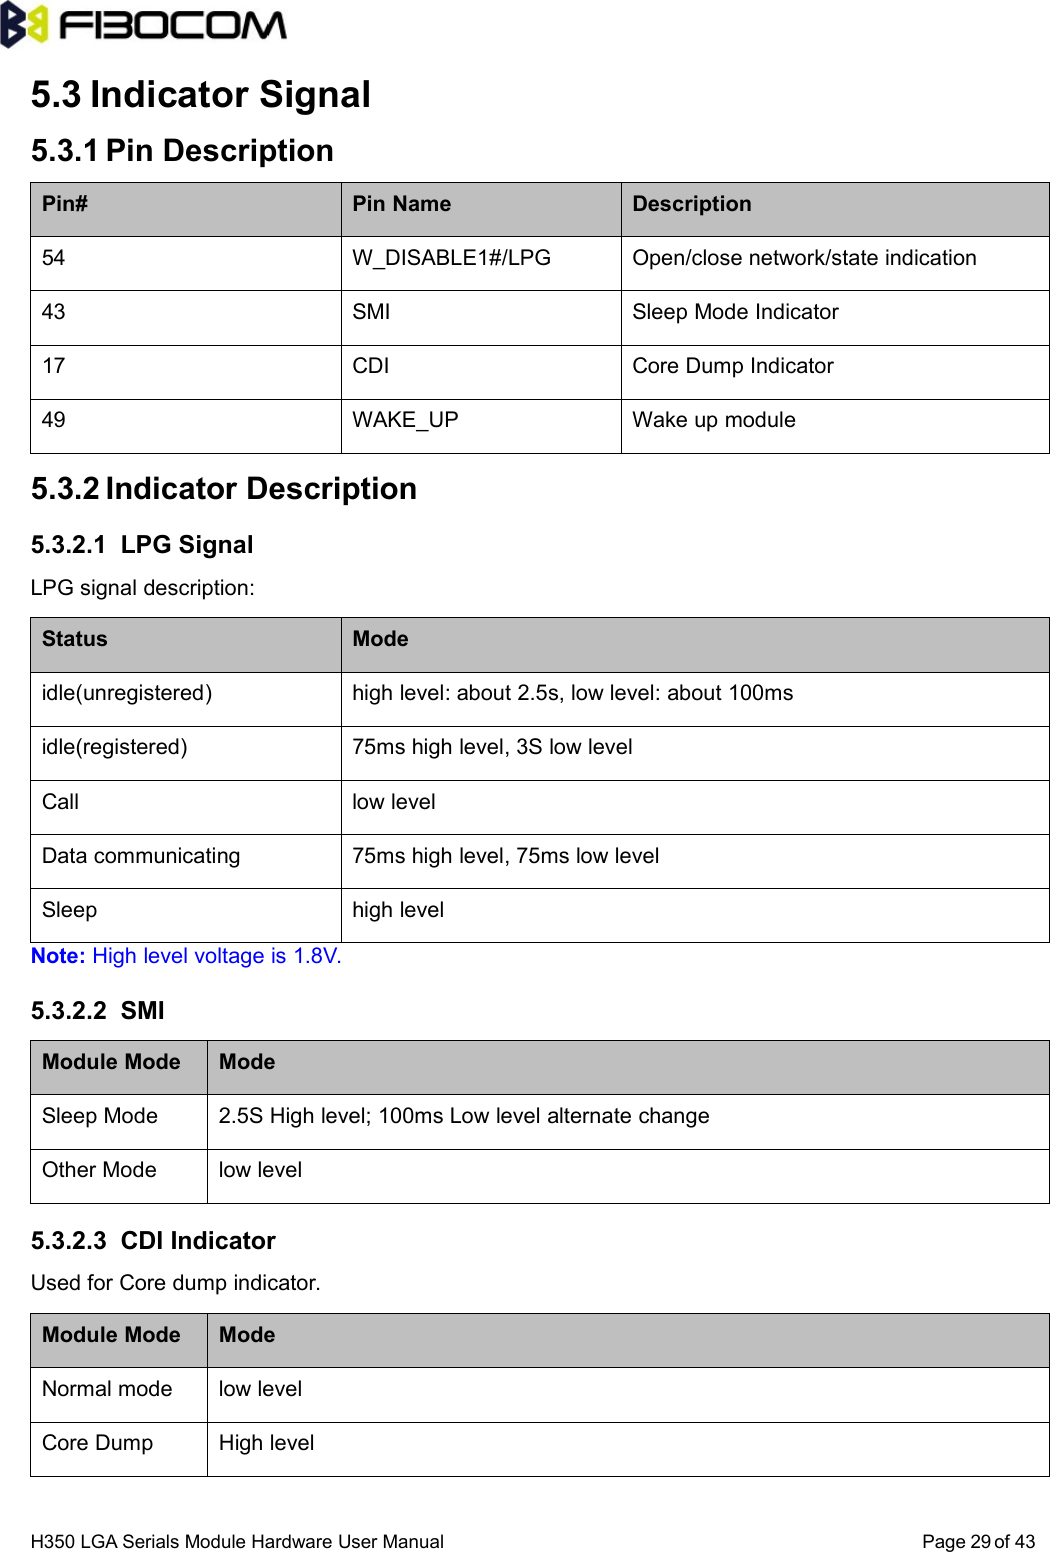 H350 LGA Serials Module Hardware User Manual Page of 43295.3 Indicator Signal5.3.1 Pin DescriptionPin# Pin Name Description54 W_DISABLE1#/LPG Open/close network/state indication43 SMI Sleep Mode Indicator17 CDI Core Dump Indicator49 WAKE_UP Wake up module5.3.2 Indicator Description5.3.2.1 LPG SignalLPG signal description:Status Modeidle(unregistered) high level: about 2.5s, low level: about 100msidle(registered) 75ms high level, 3S low levelCall low levelData communicating 75ms high level, 75ms low levelSleep high levelNote: High level voltage is 1.8V.5.3.2.2 SMIModule Mode ModeSleep Mode 2.5S High level; 100ms Low level alternate changeOther Mode low level5.3.2.3 CDI IndicatorUsed for Core dump indicator.Module Mode ModeNormal mode low levelCore Dump High level